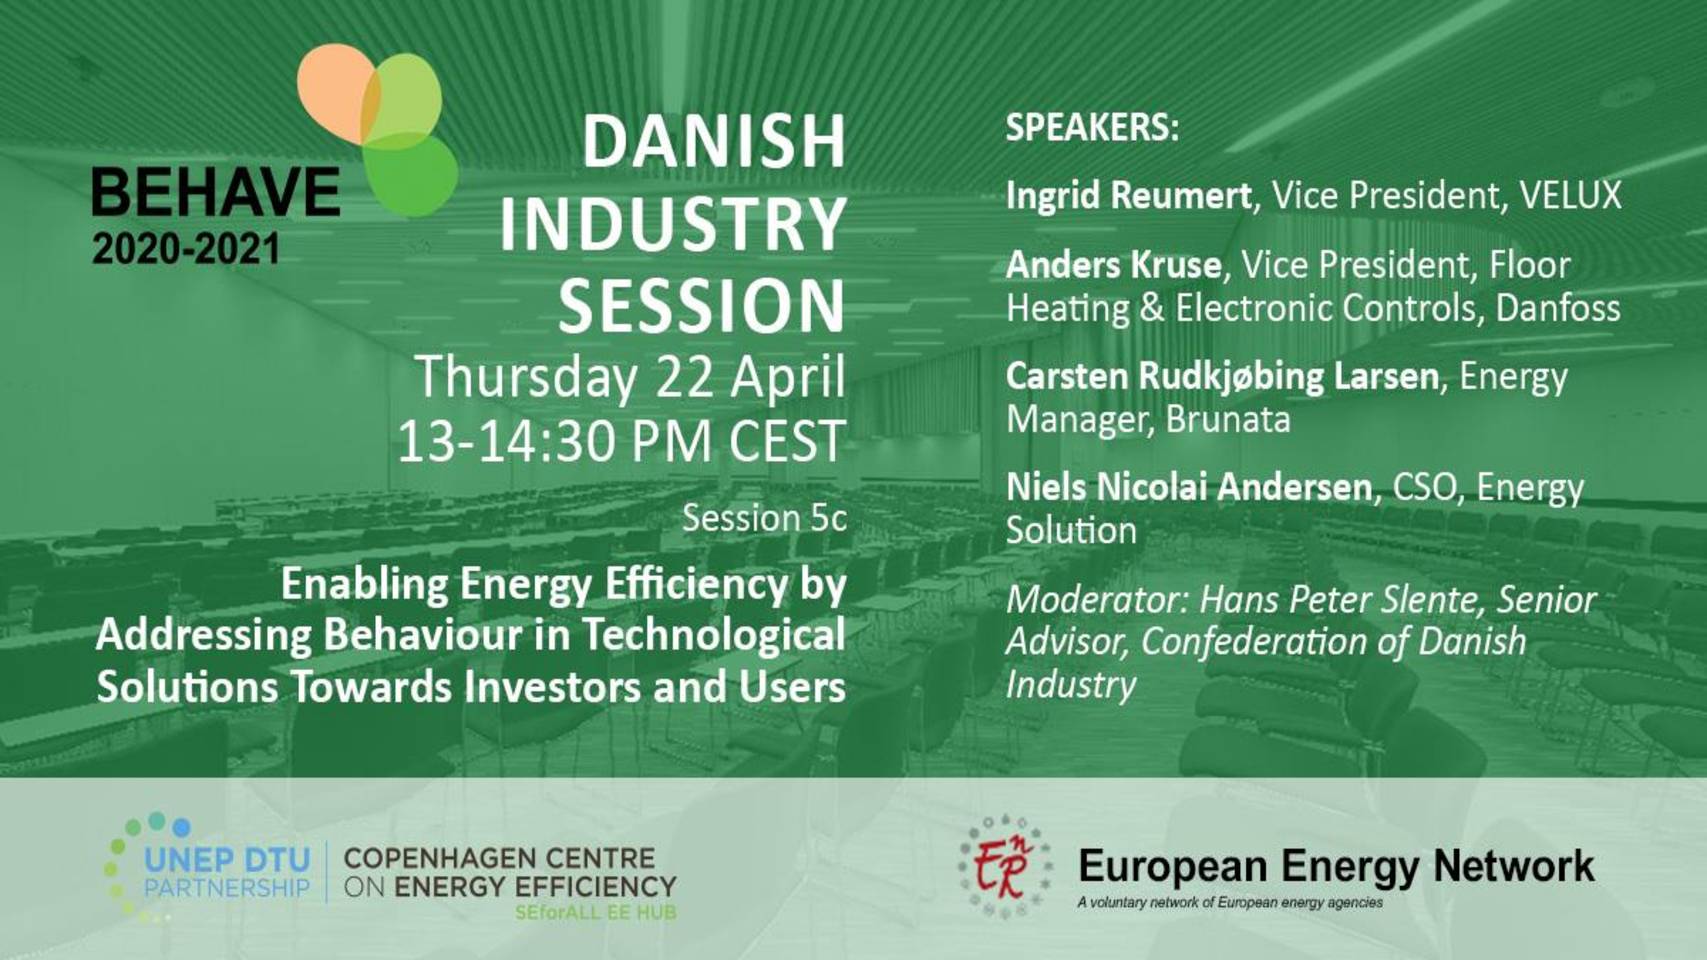 Enabling Energy Efficiency by Addressing Behaviour in Technological Solutions Towards Investors and Users